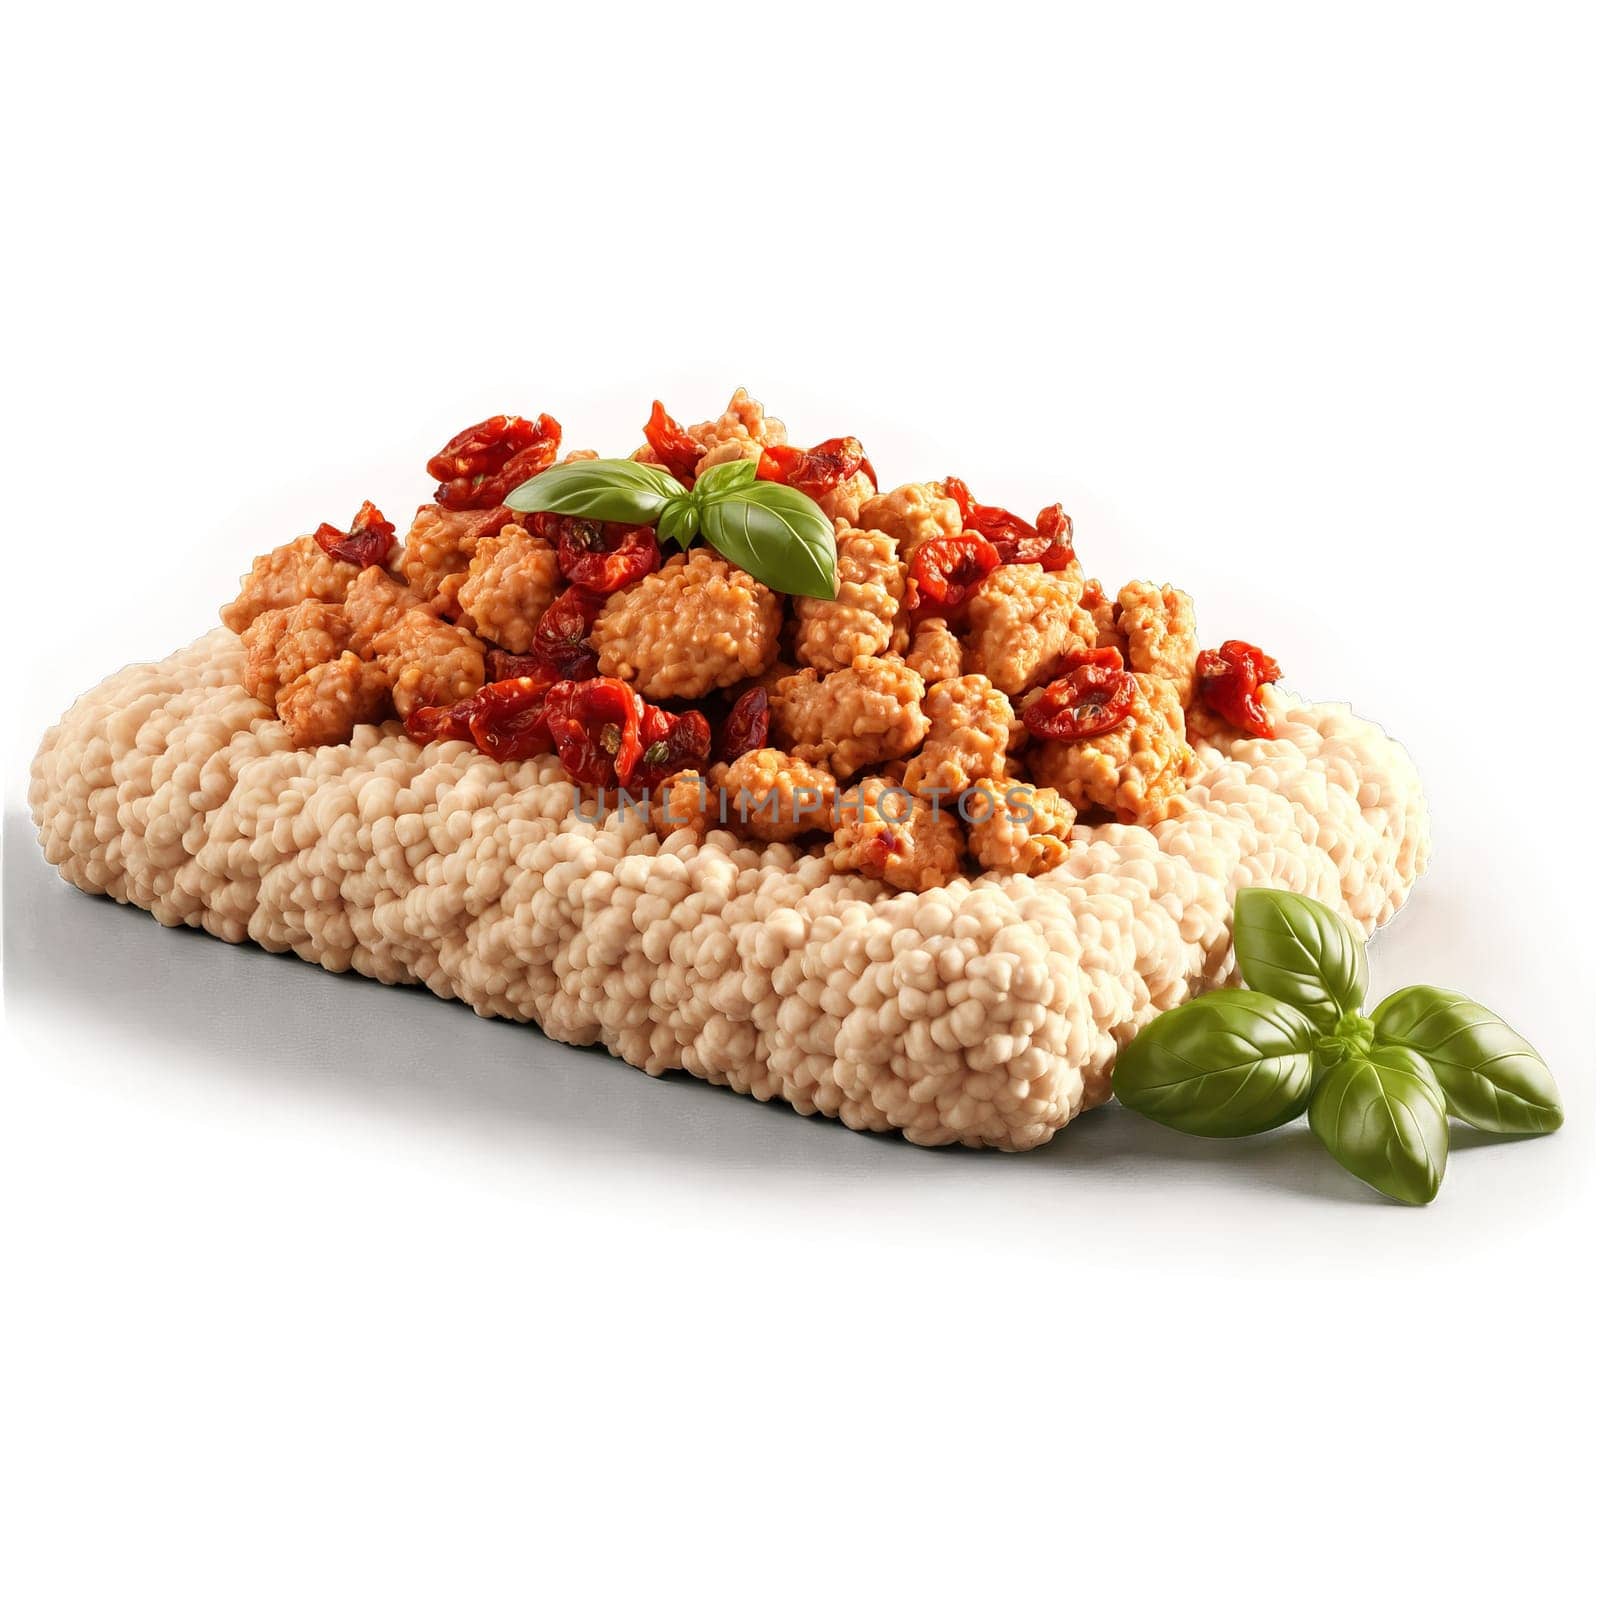 Ground chicken pale and lean with basil leaves and sun dried tomatoes tumbling in by panophotograph